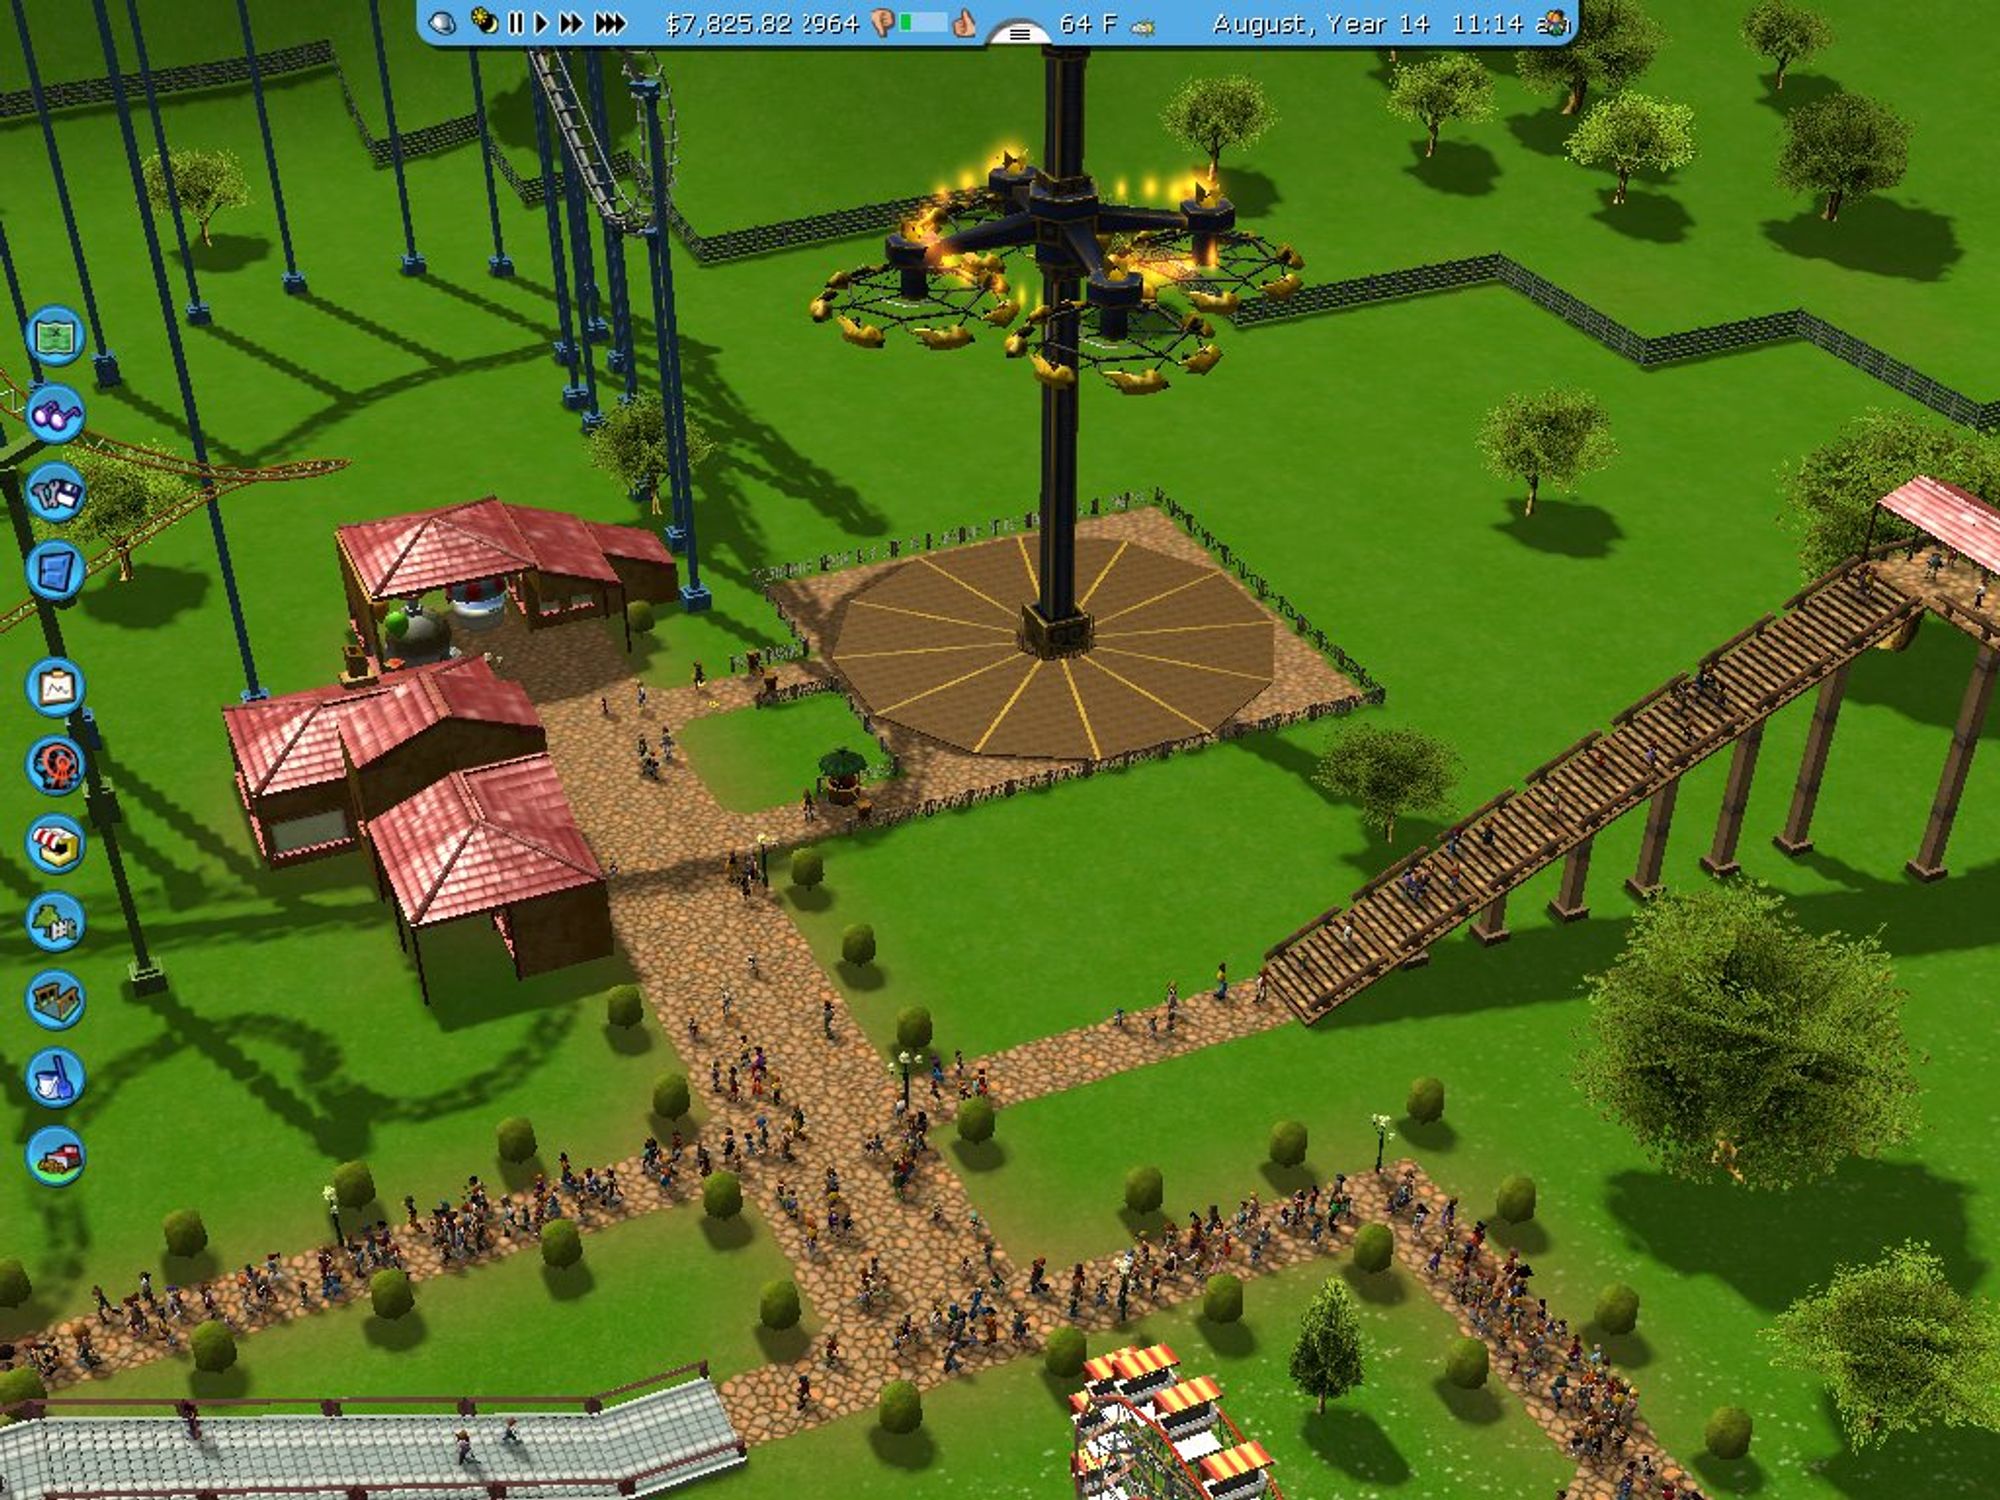 Devices tycoon 3.3. Rollercoaster Tycoon 3. Rollercoaster Tycoon 3 DLC. Rollercoaster Tycoon 3 на ПК. Rollercoaster Tycoon (disambiguation).